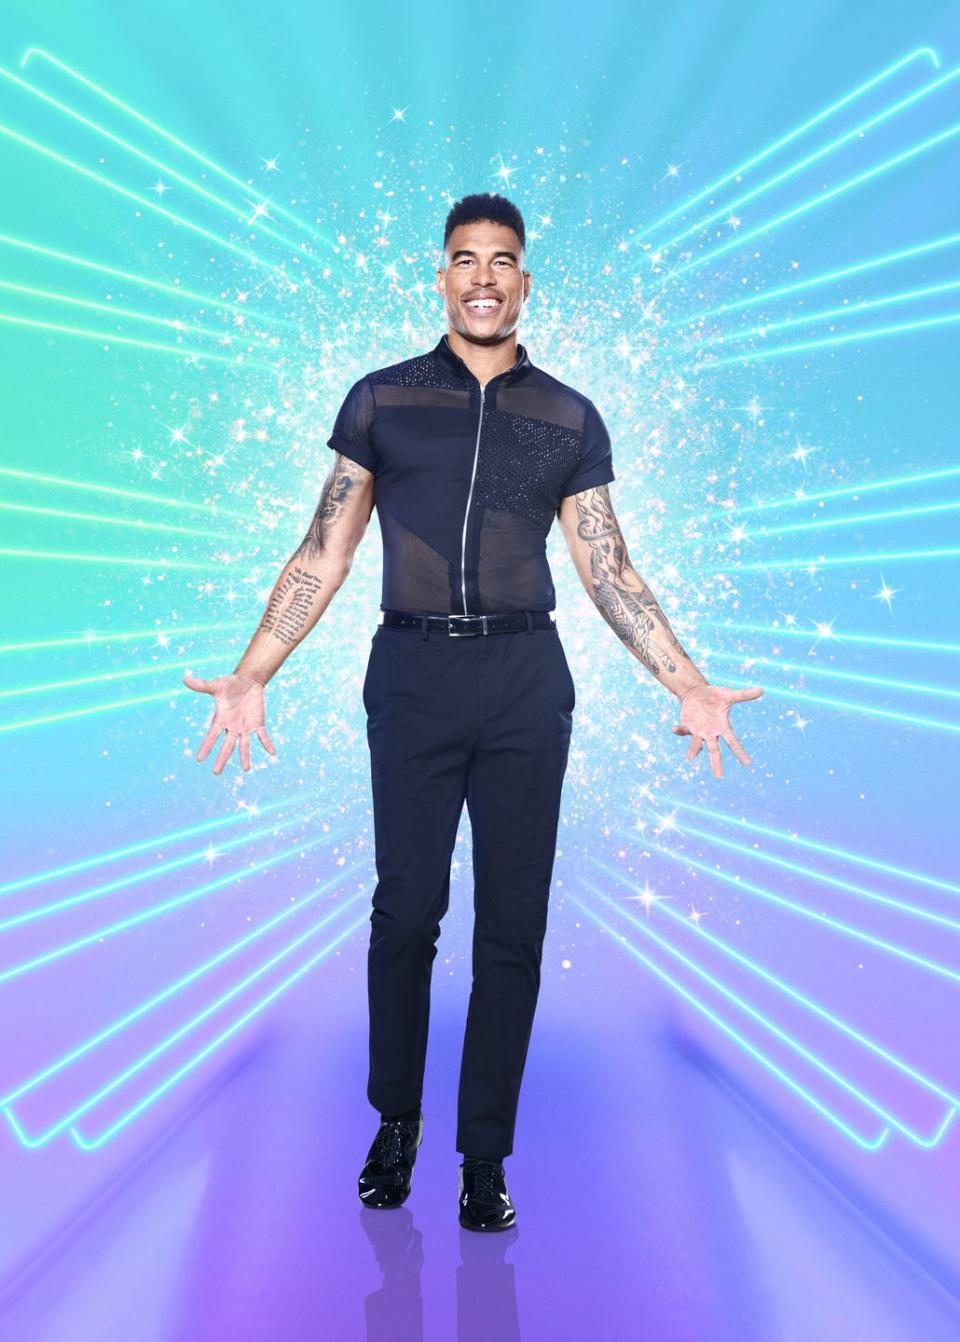 Strictly Come Dancing 2020 cast photos